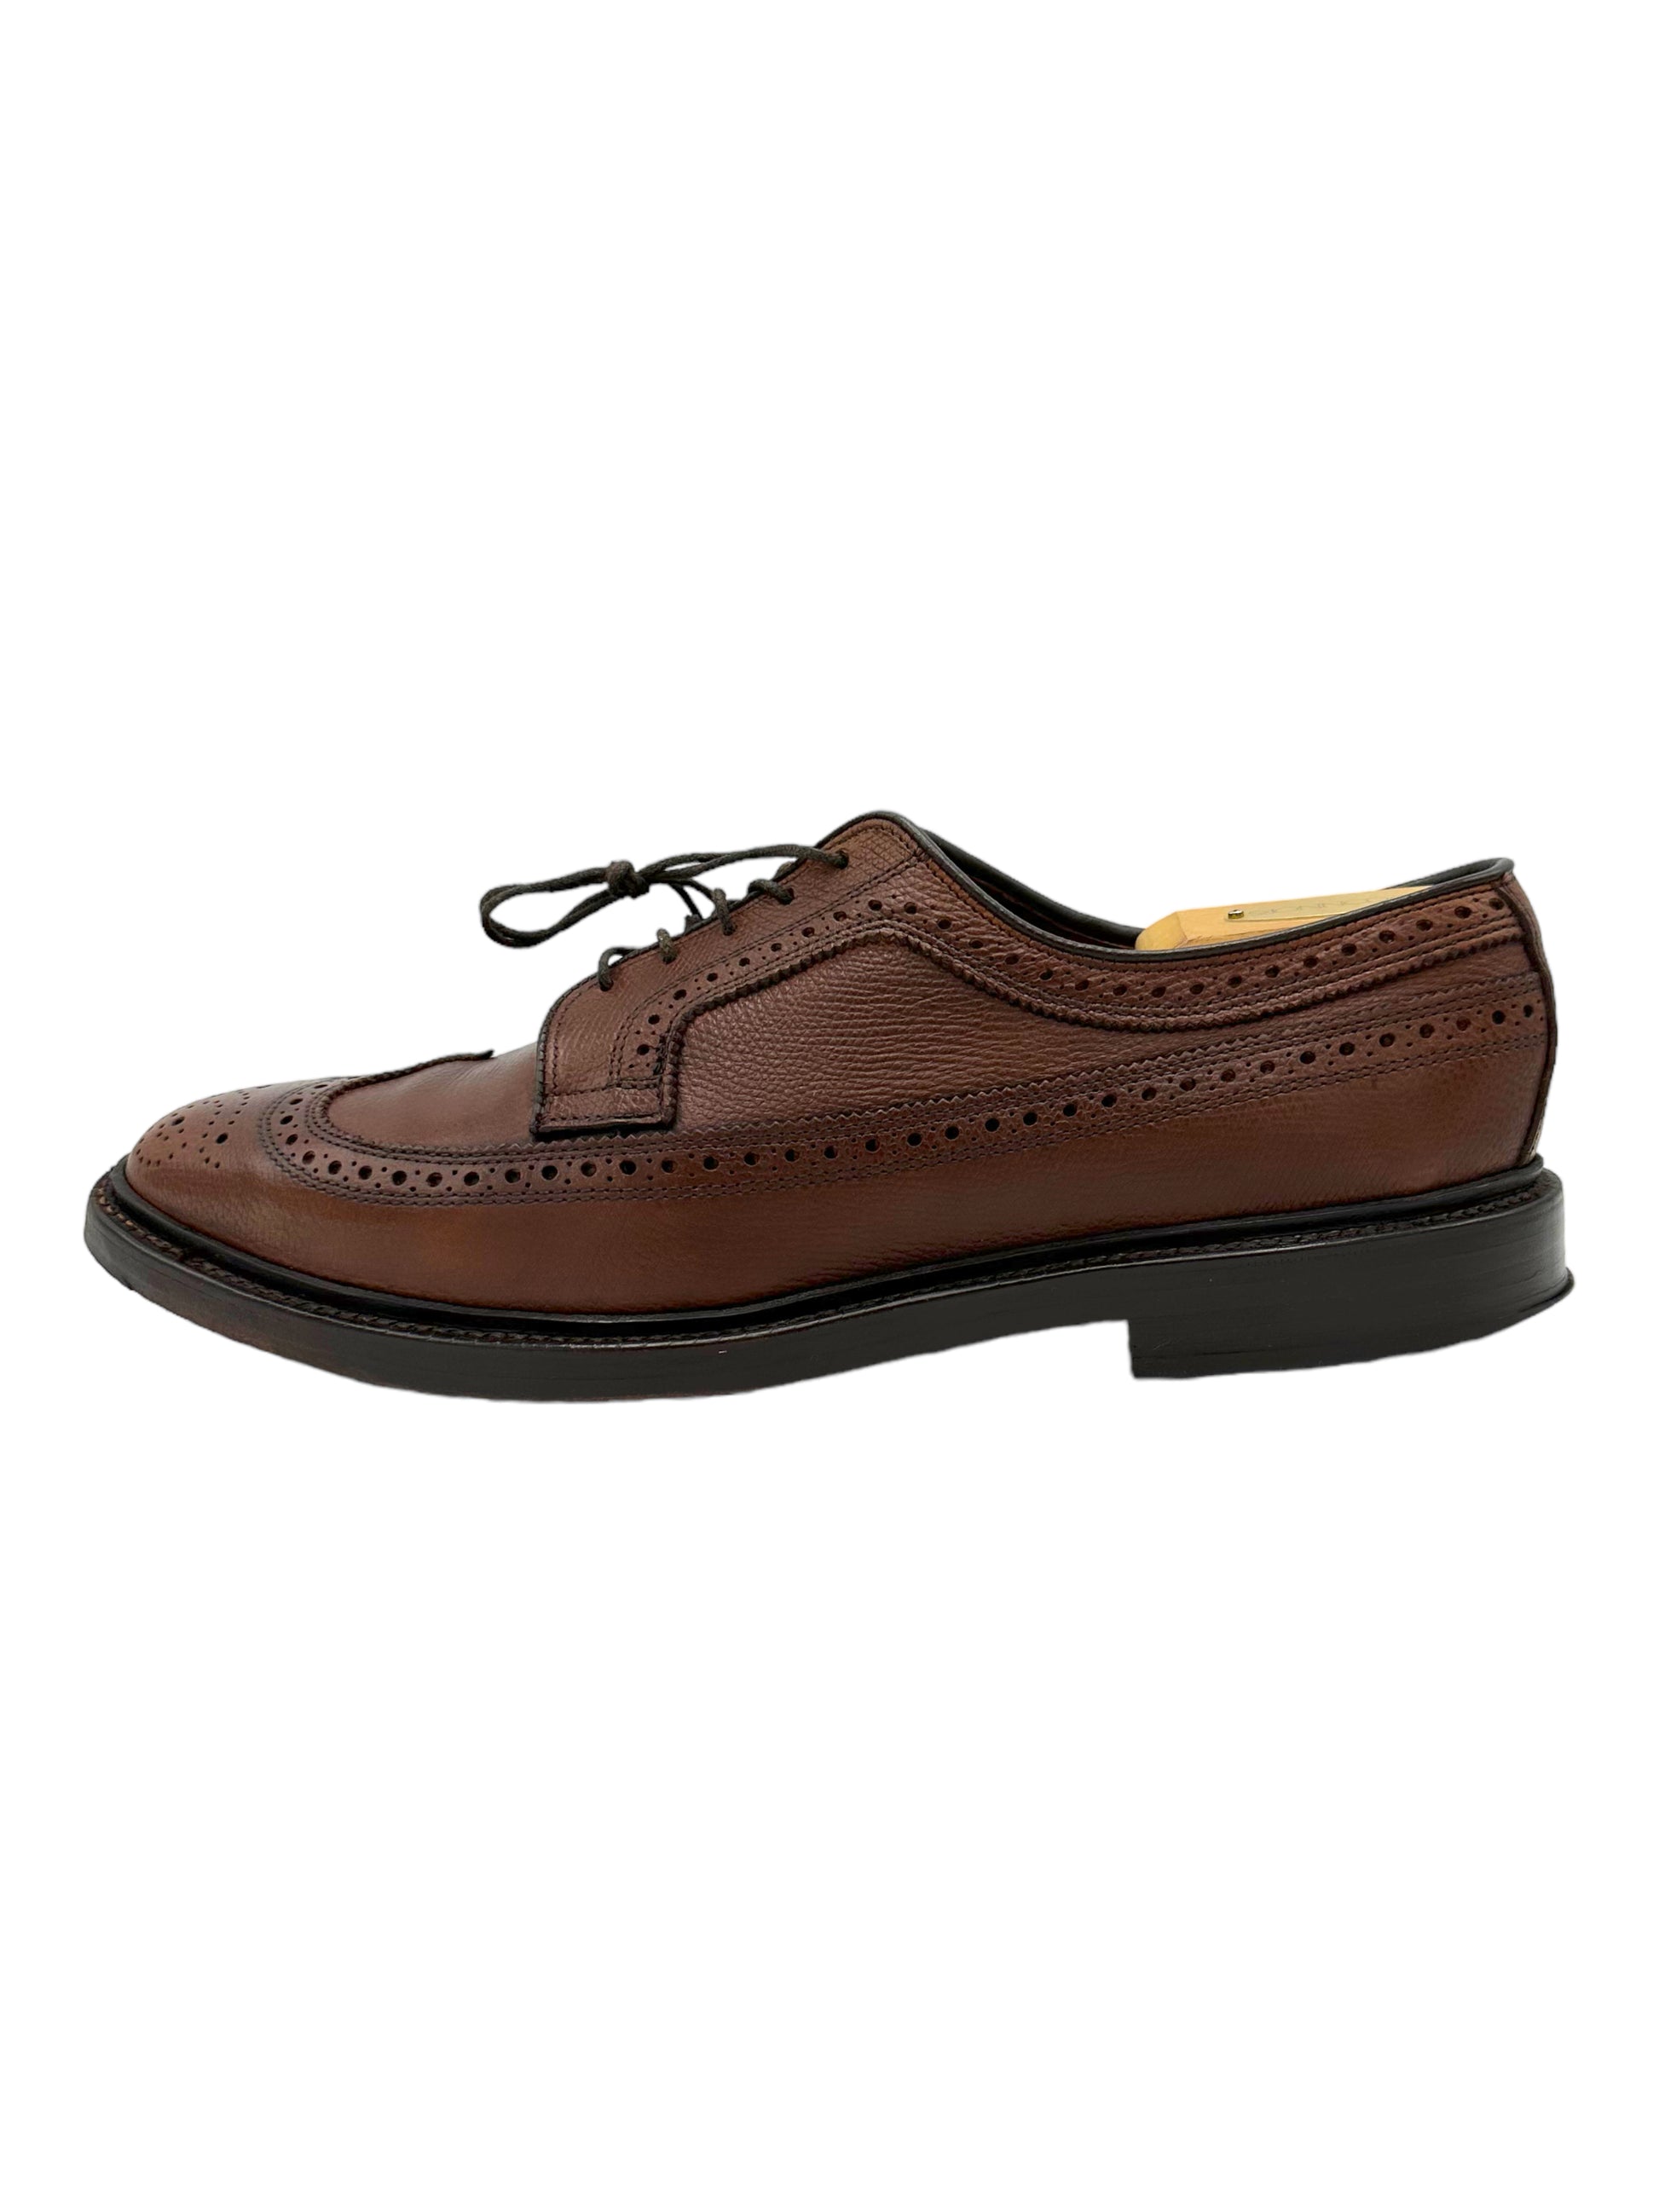 Allen Edmonds Walnut Grain Macneil Longwing Dress Shoes - Genuine Design Luxury Consignment Calgary, Alberta, Canada New and Pre-Owned Clothing, Shoes, Accessories.